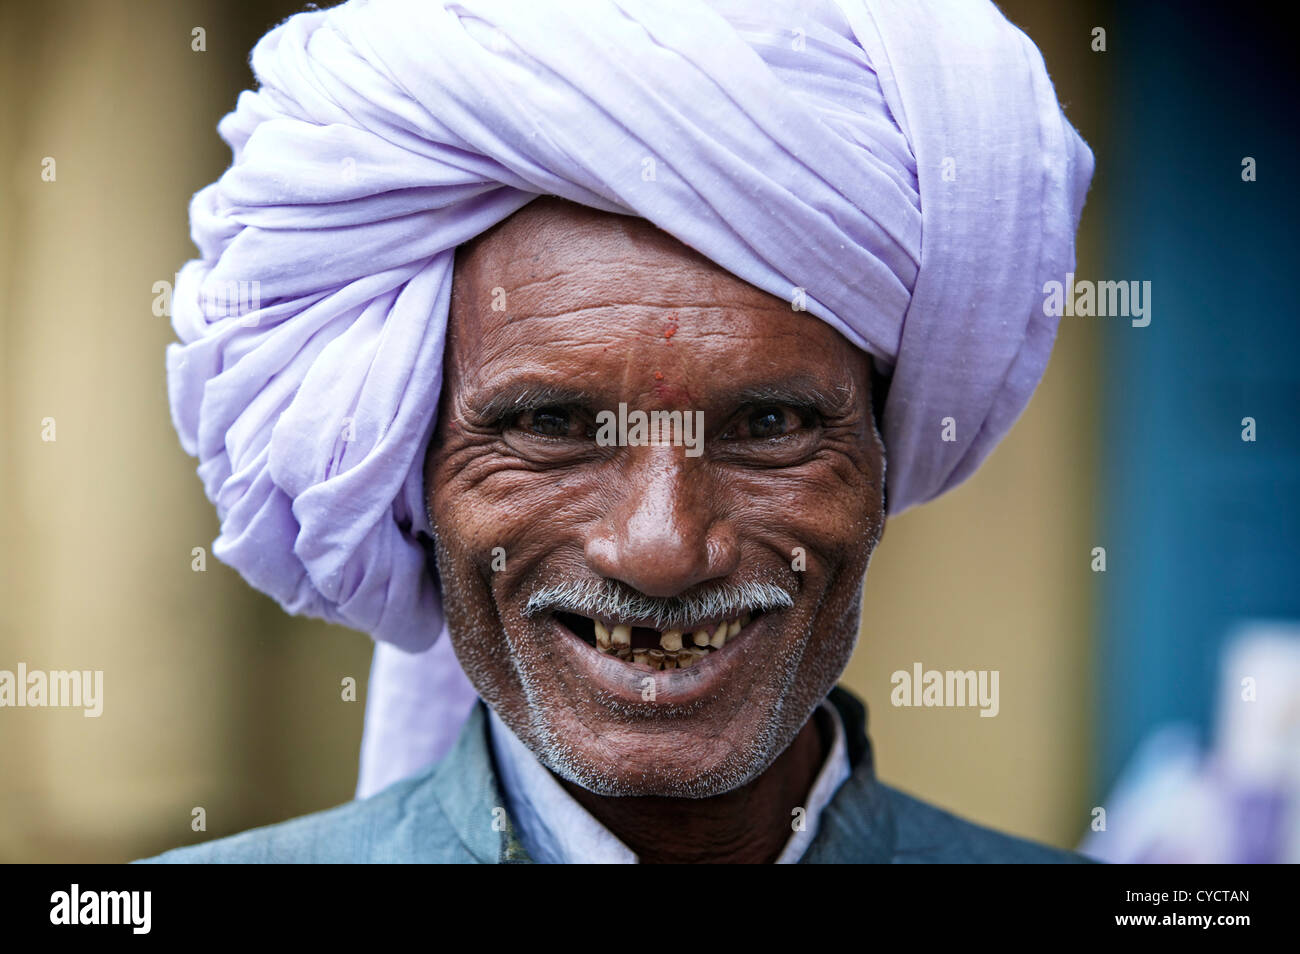 Smiling Indian man with tulband Stock Photo - Alamy